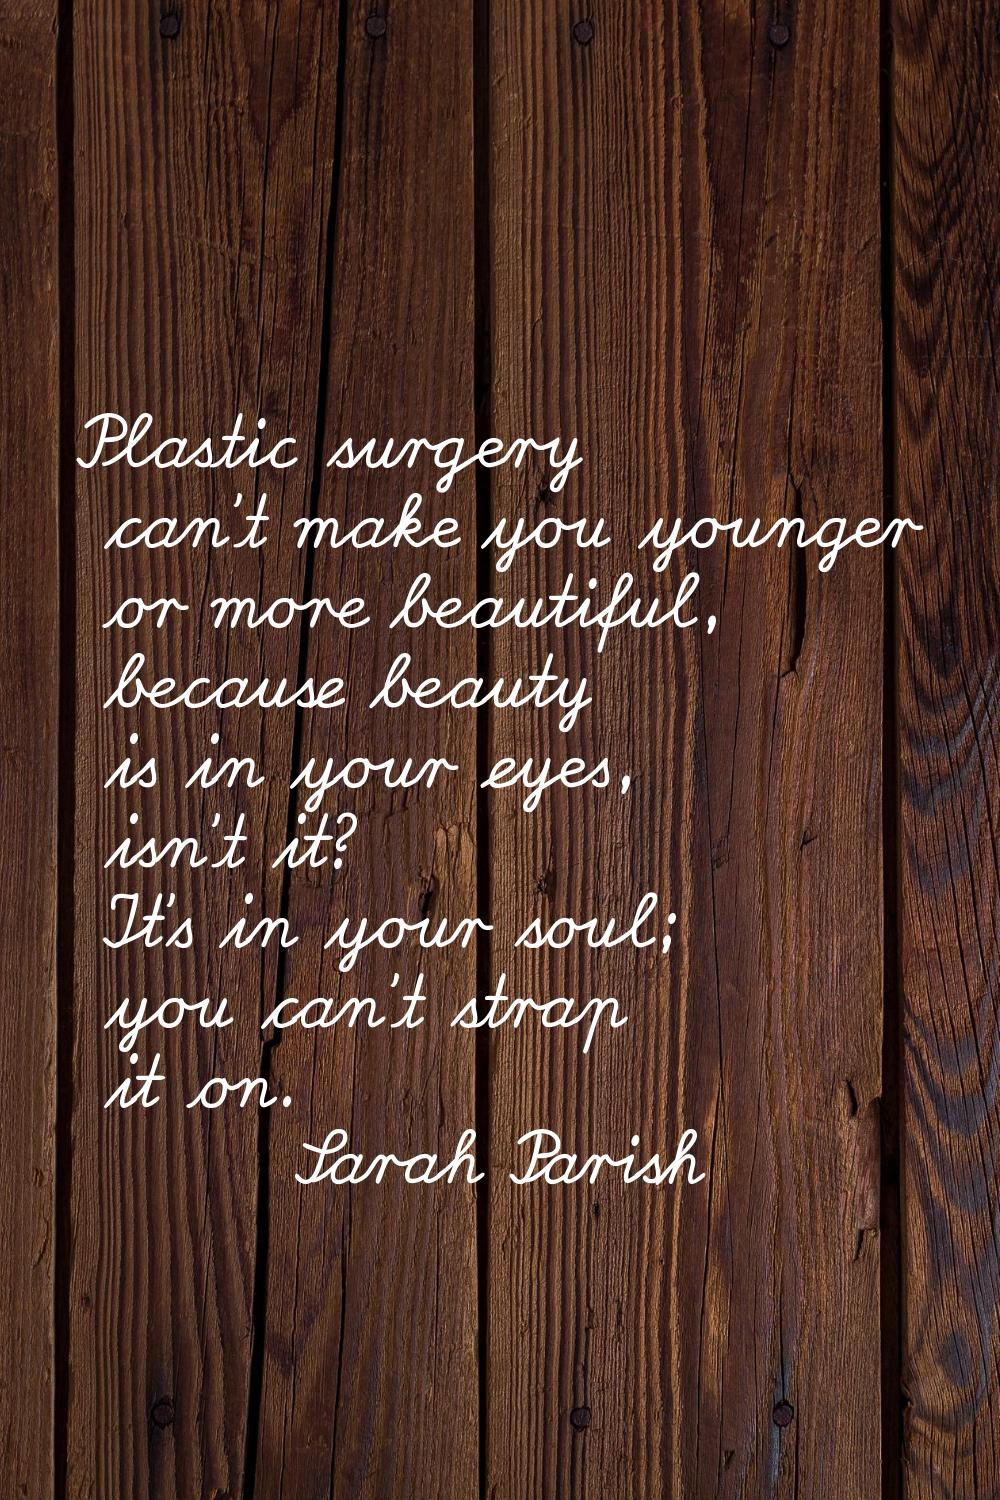 Plastic surgery can't make you younger or more beautiful, because beauty is in your eyes, isn't it?